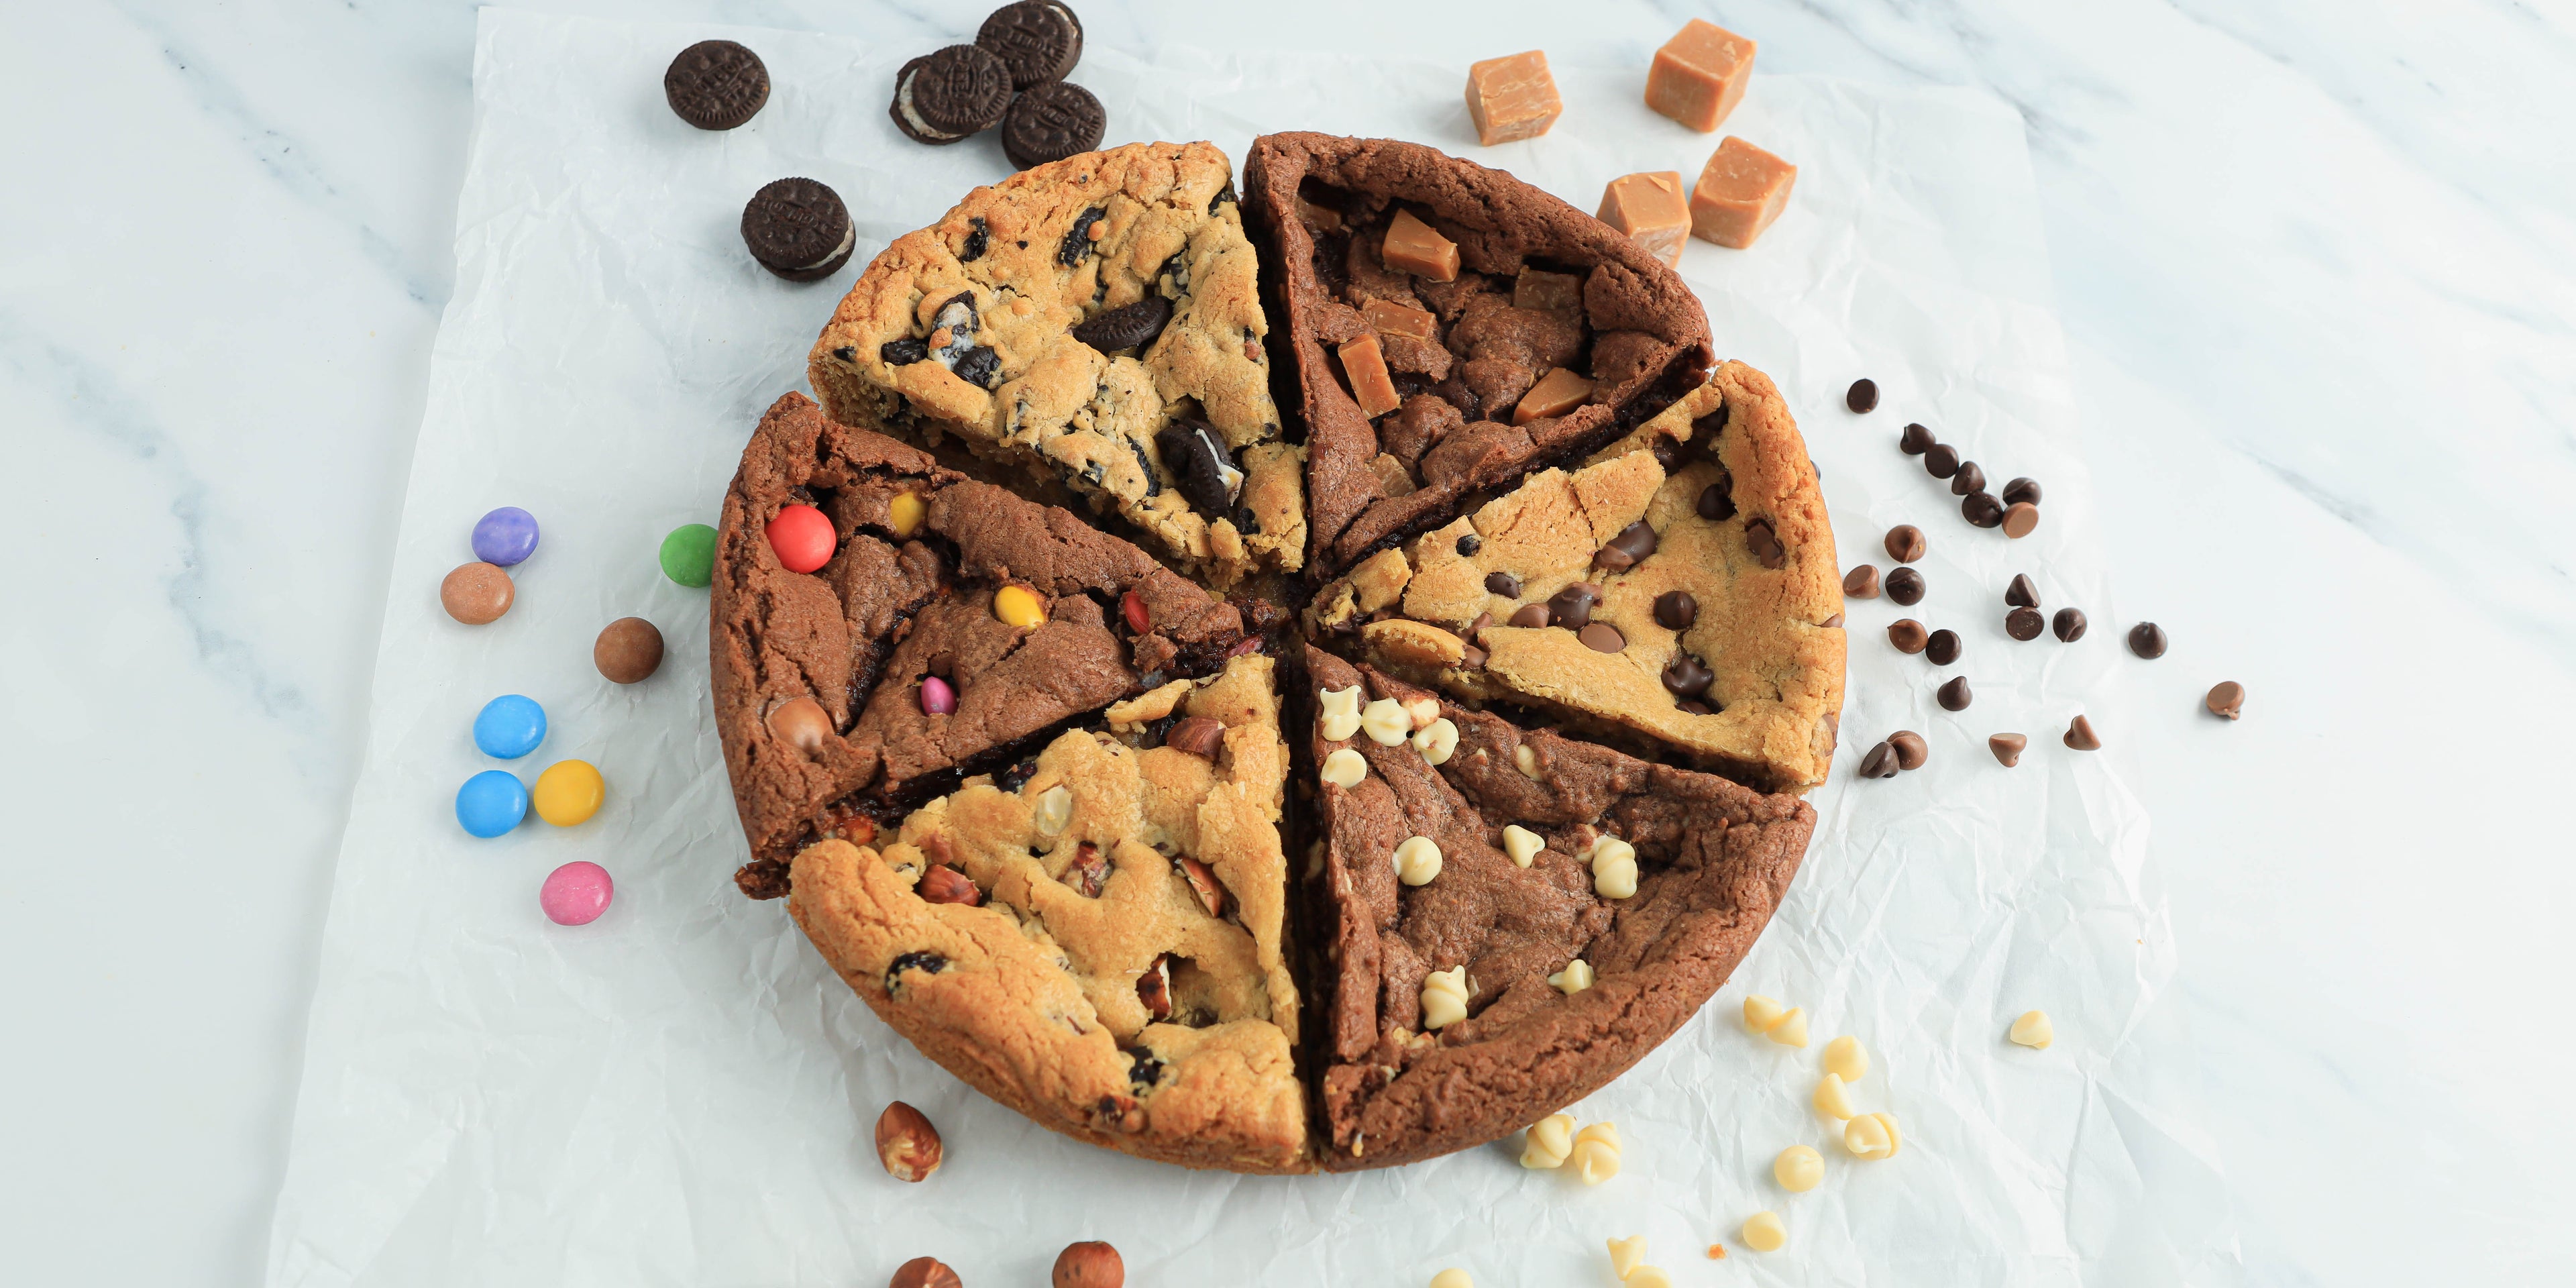 Cookie cake cut into 6 slices with sweets, biscuits and chocolate chips scattered around the outside